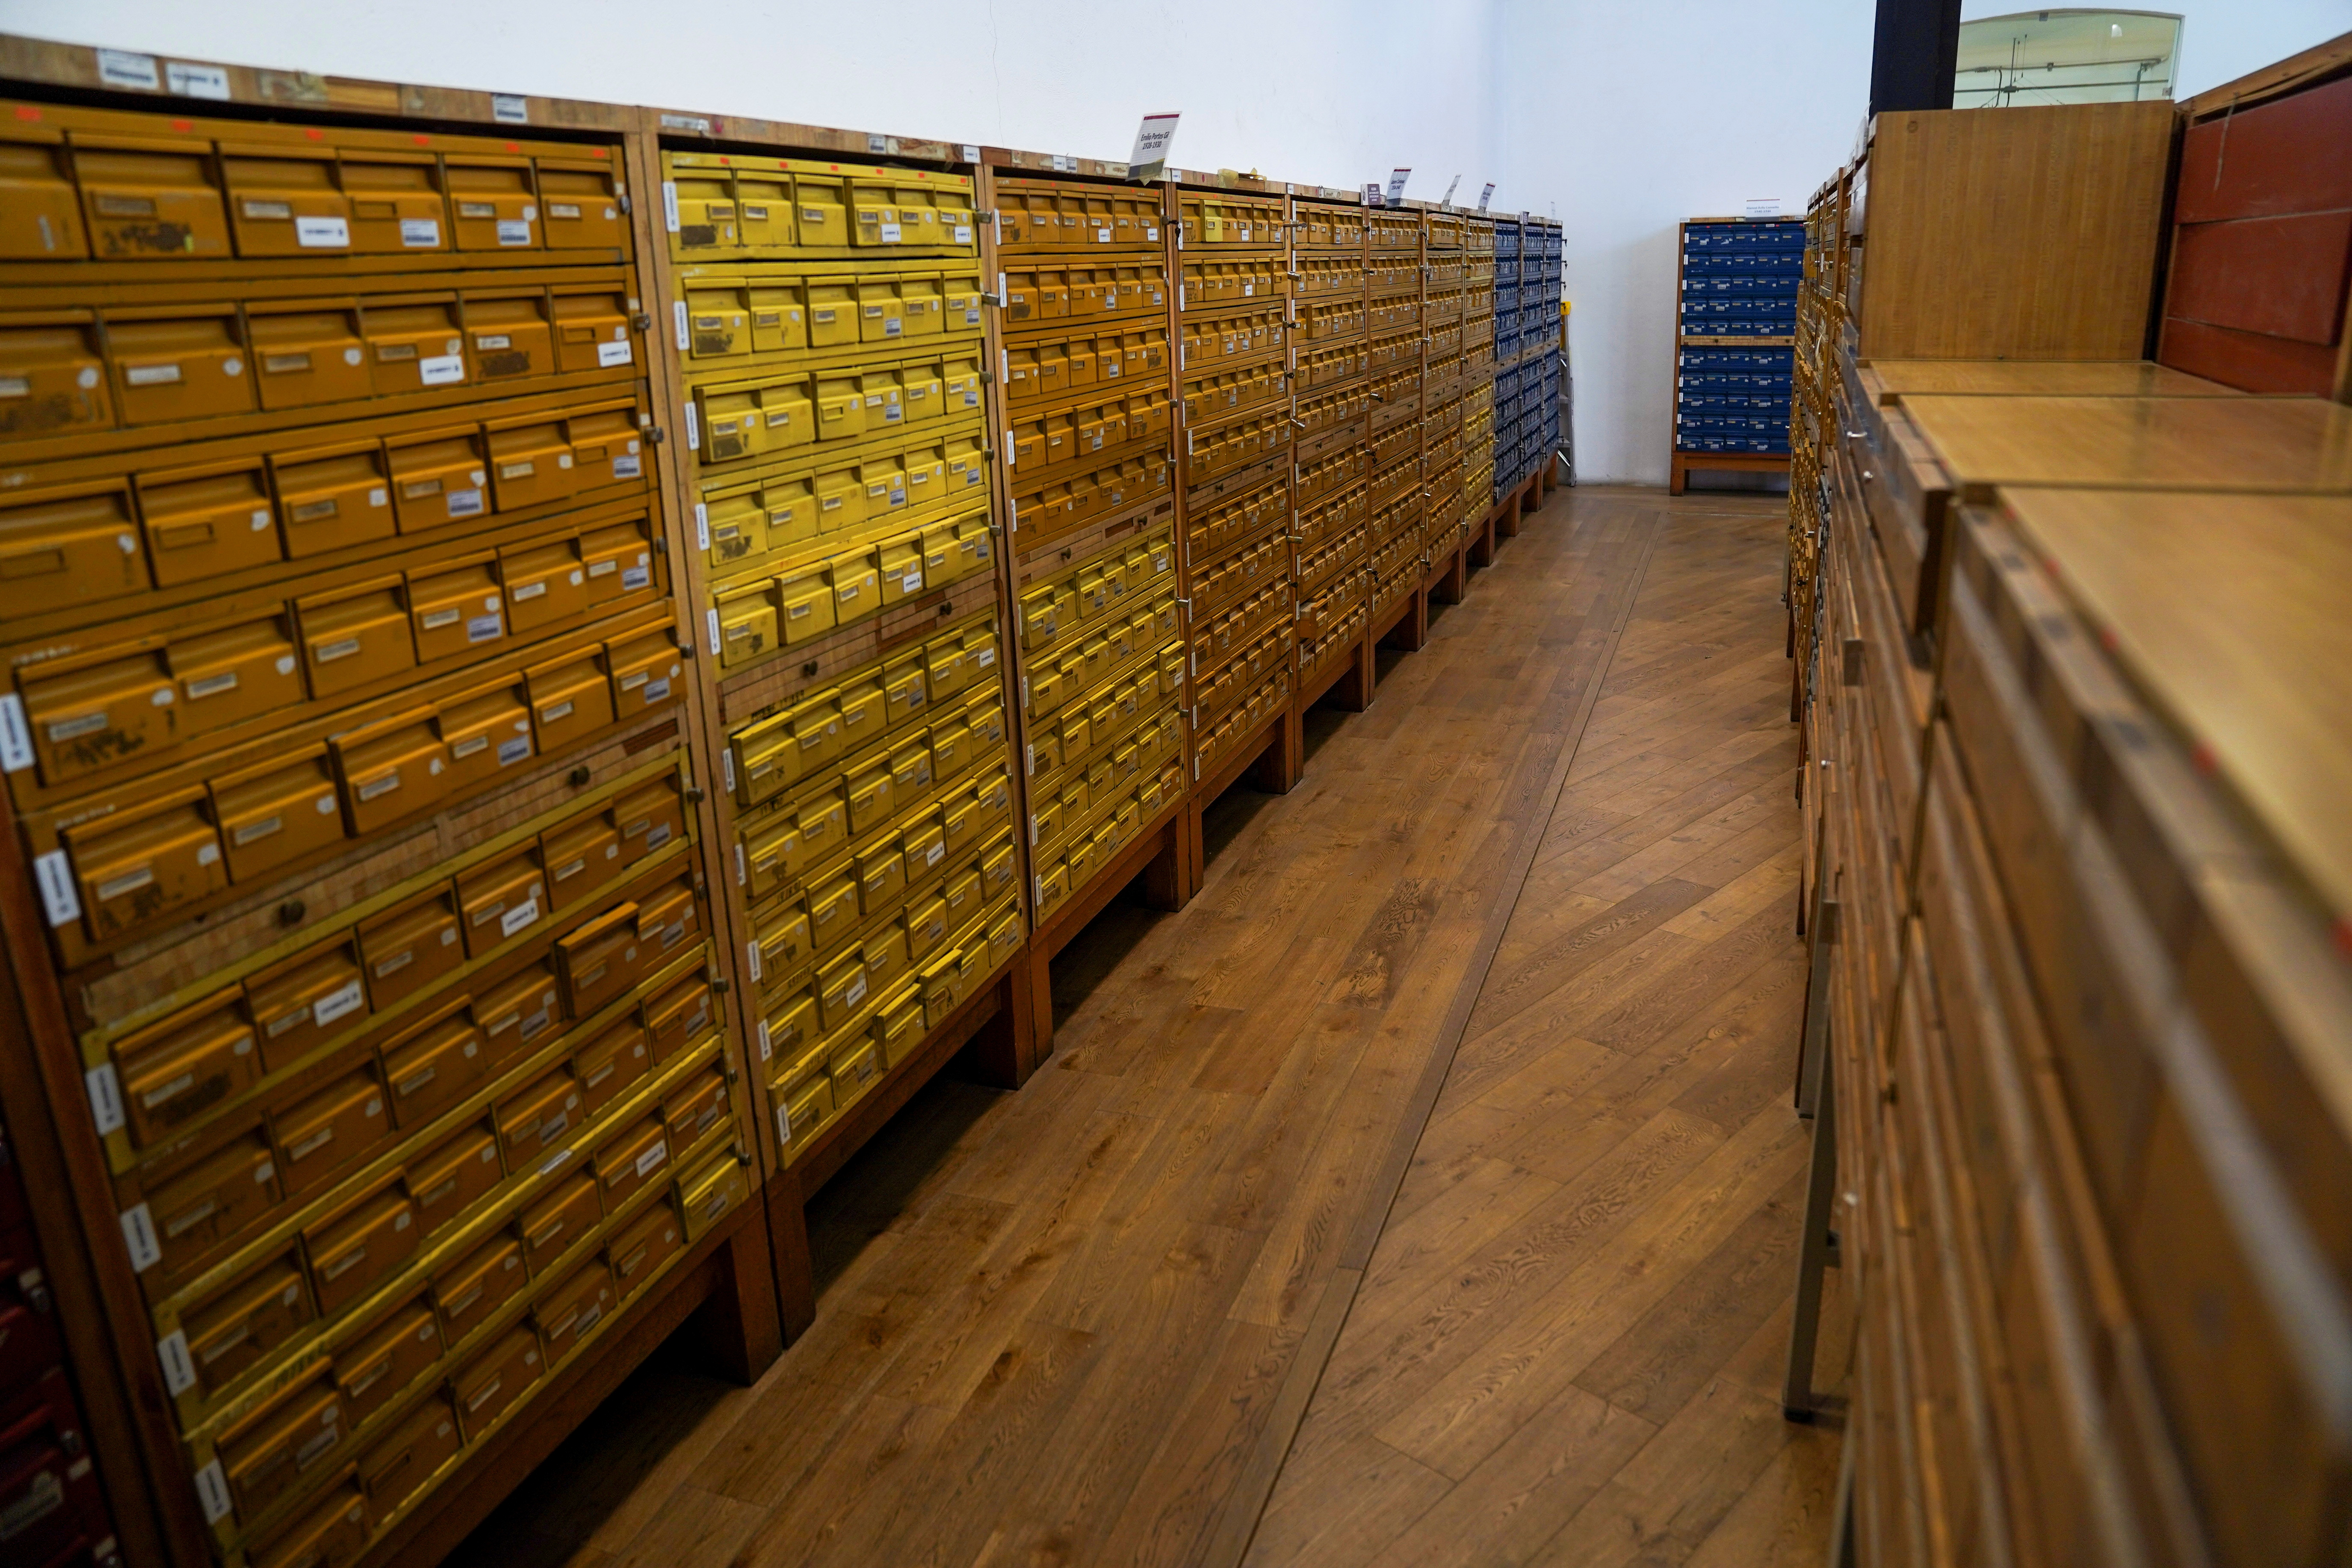 File cabinets are pictured at an area of Mexico's General Archive of the Nation in Mexico City